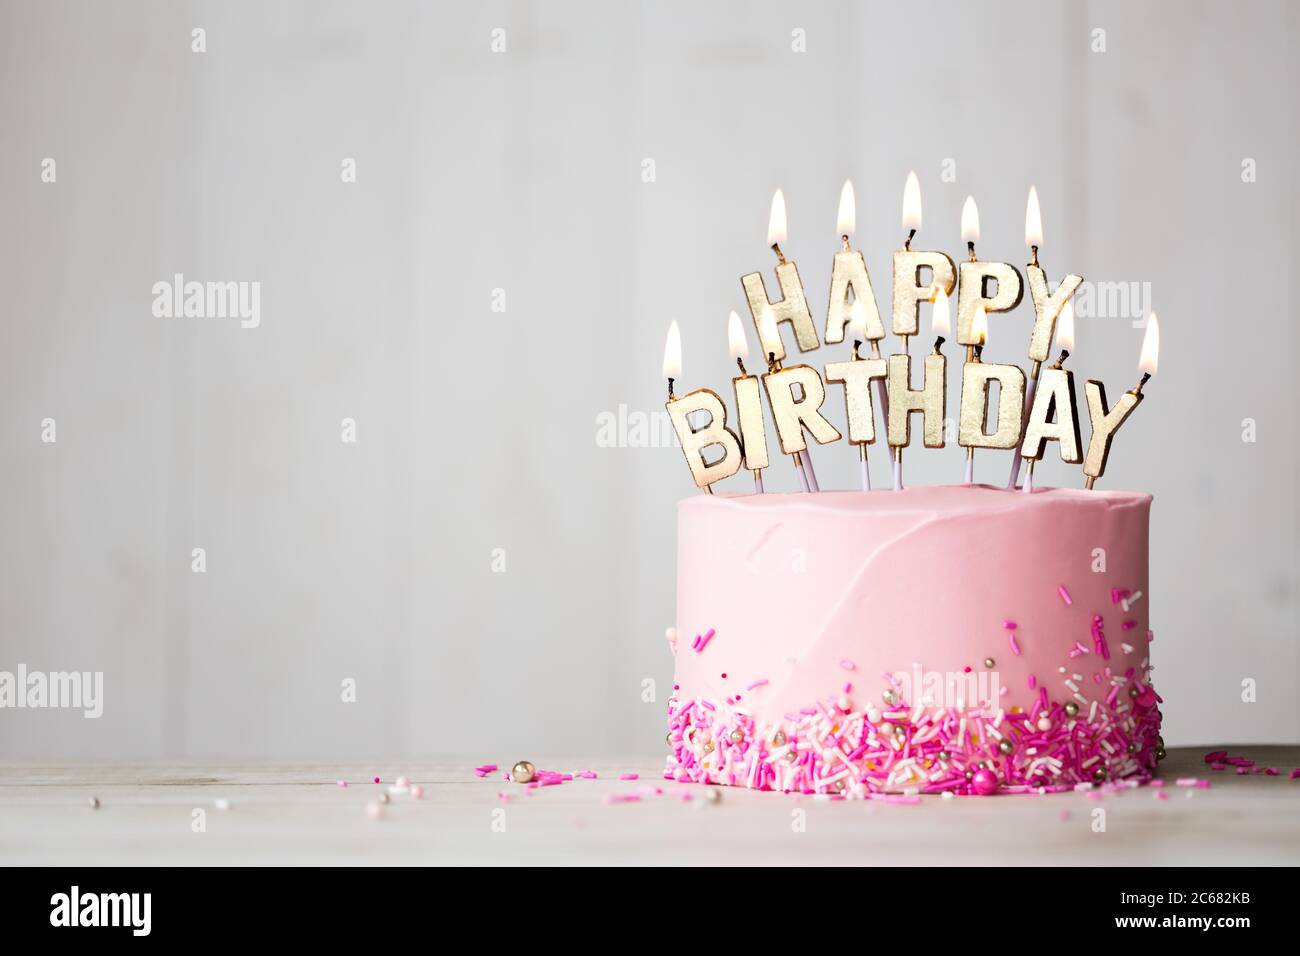 Pink birthday cake with gold happy birthday candles Stock Photo ...